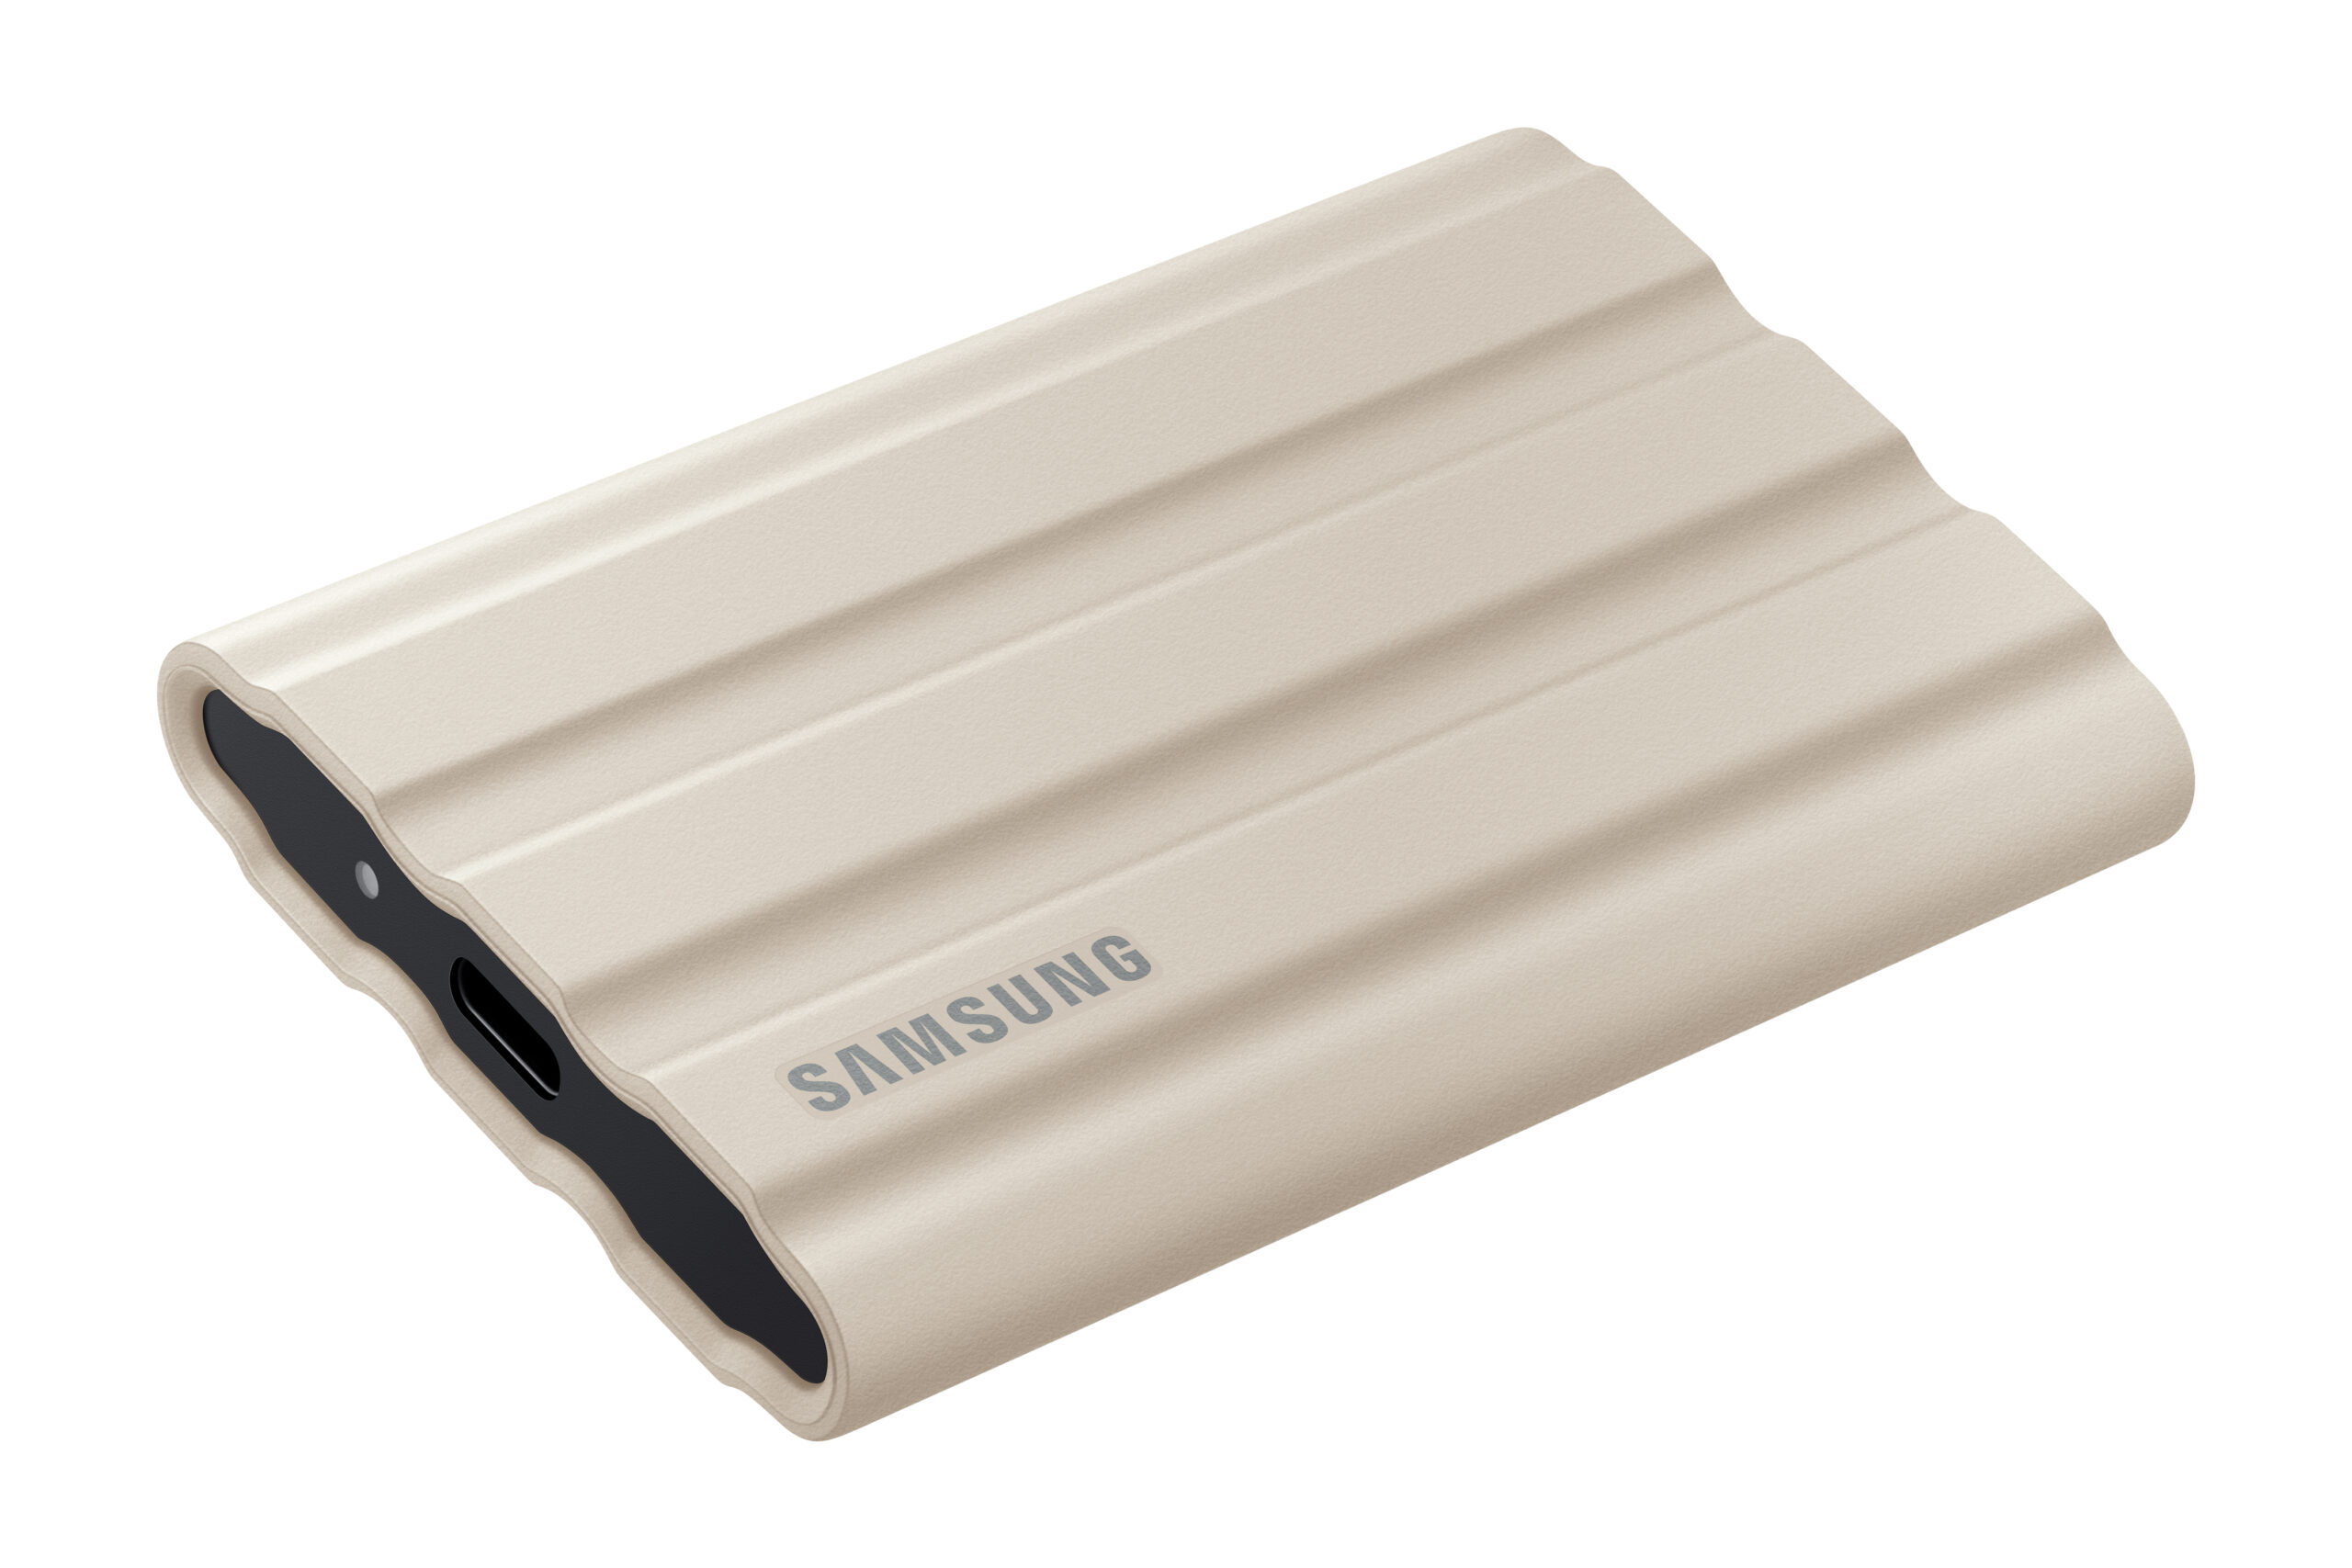 Samsung's new rugged SSD T7 Shield is shock, dust, and water resistant -  SamMobile